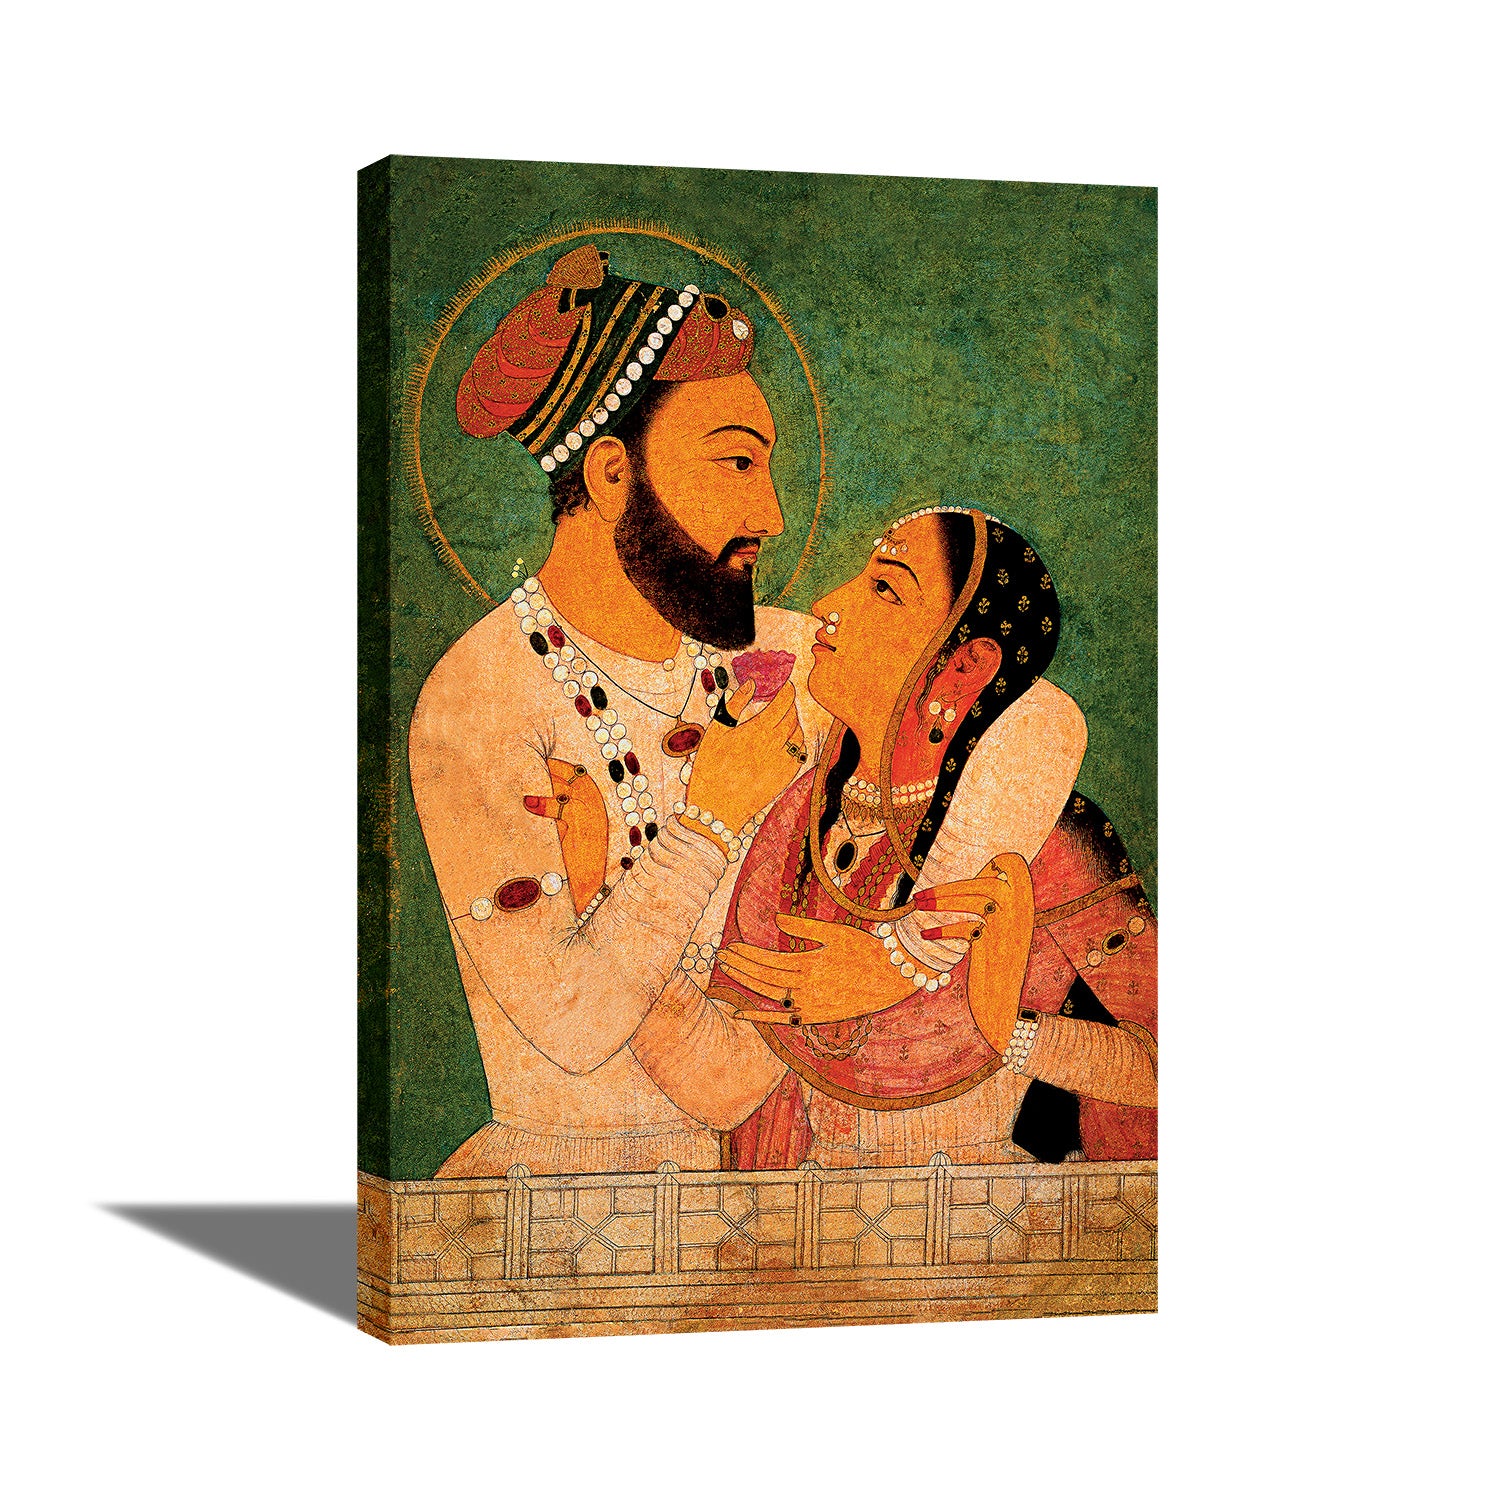 Mughal King And Queen - Canvas Painting - Framed